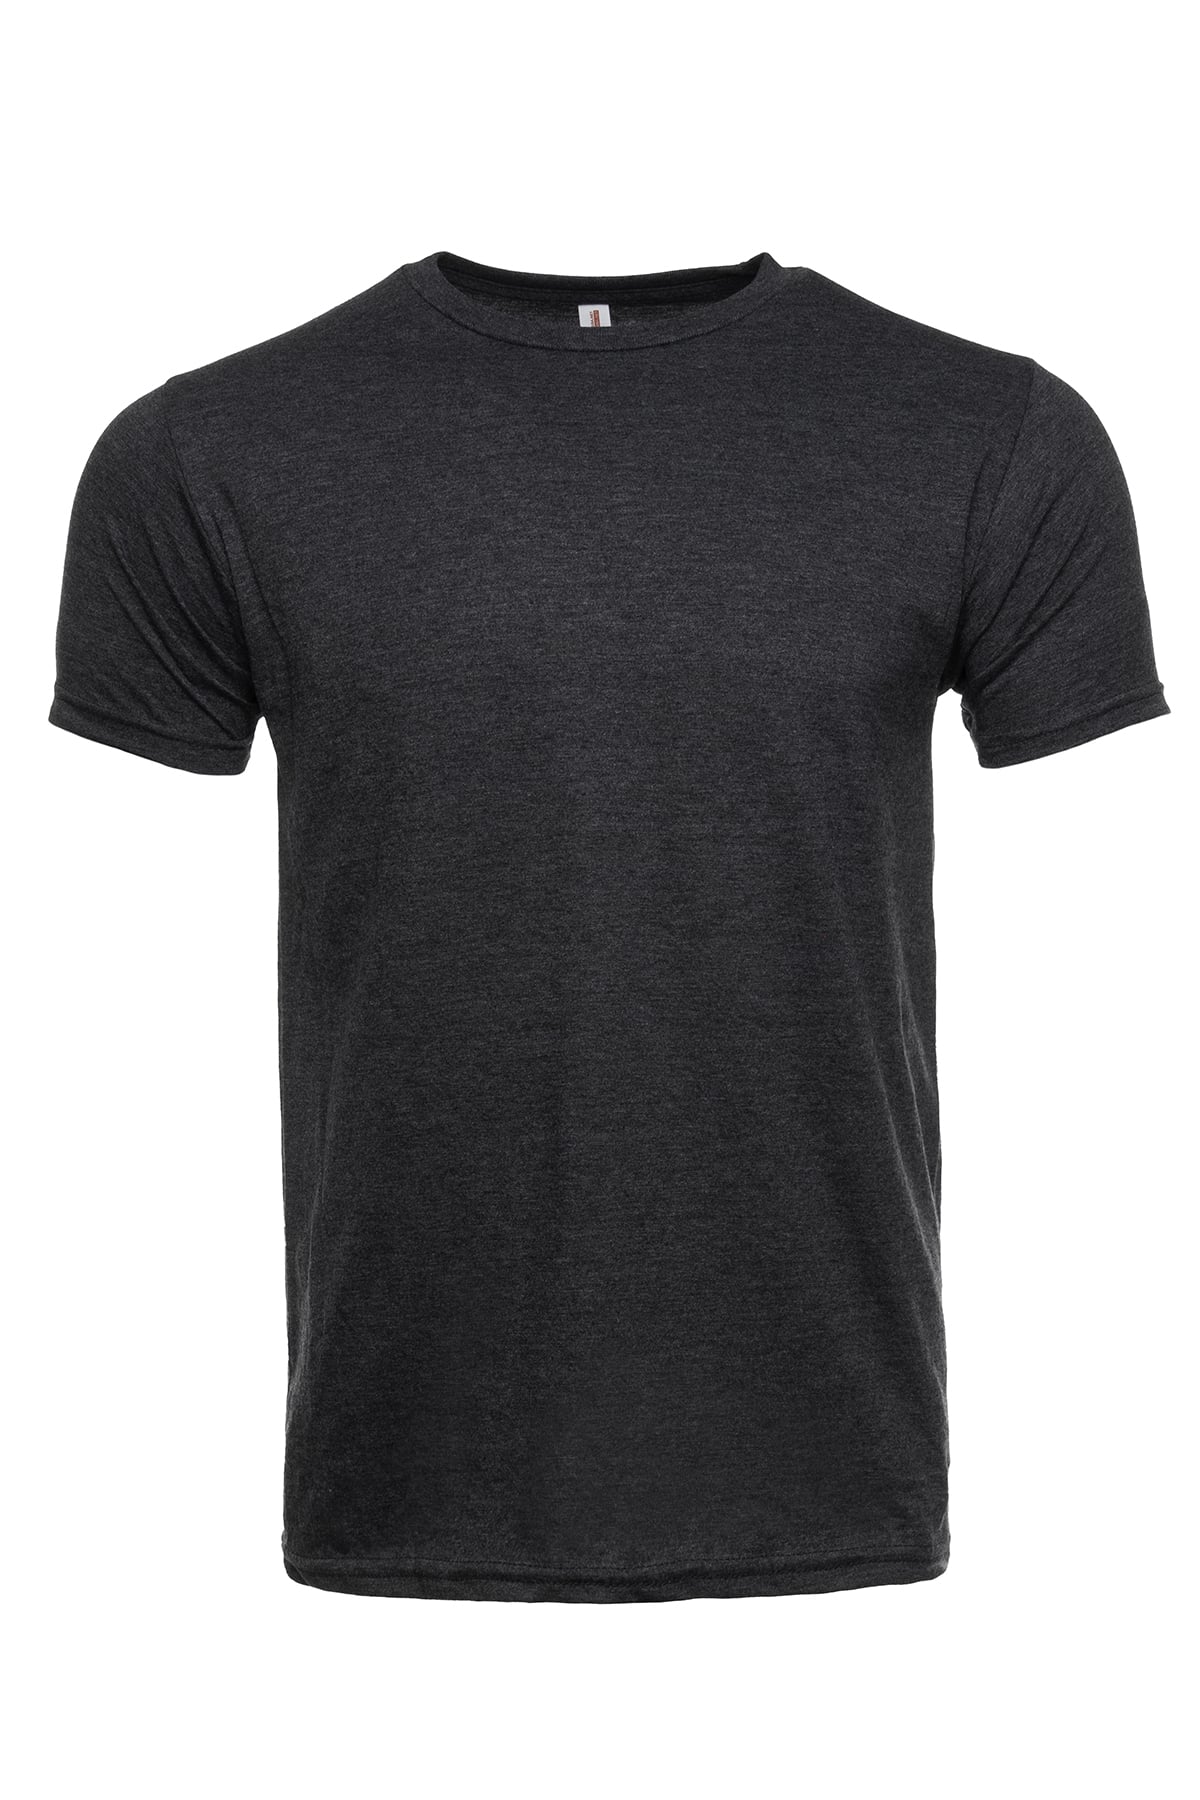 3050 Charcoal Heather Front T-shirt